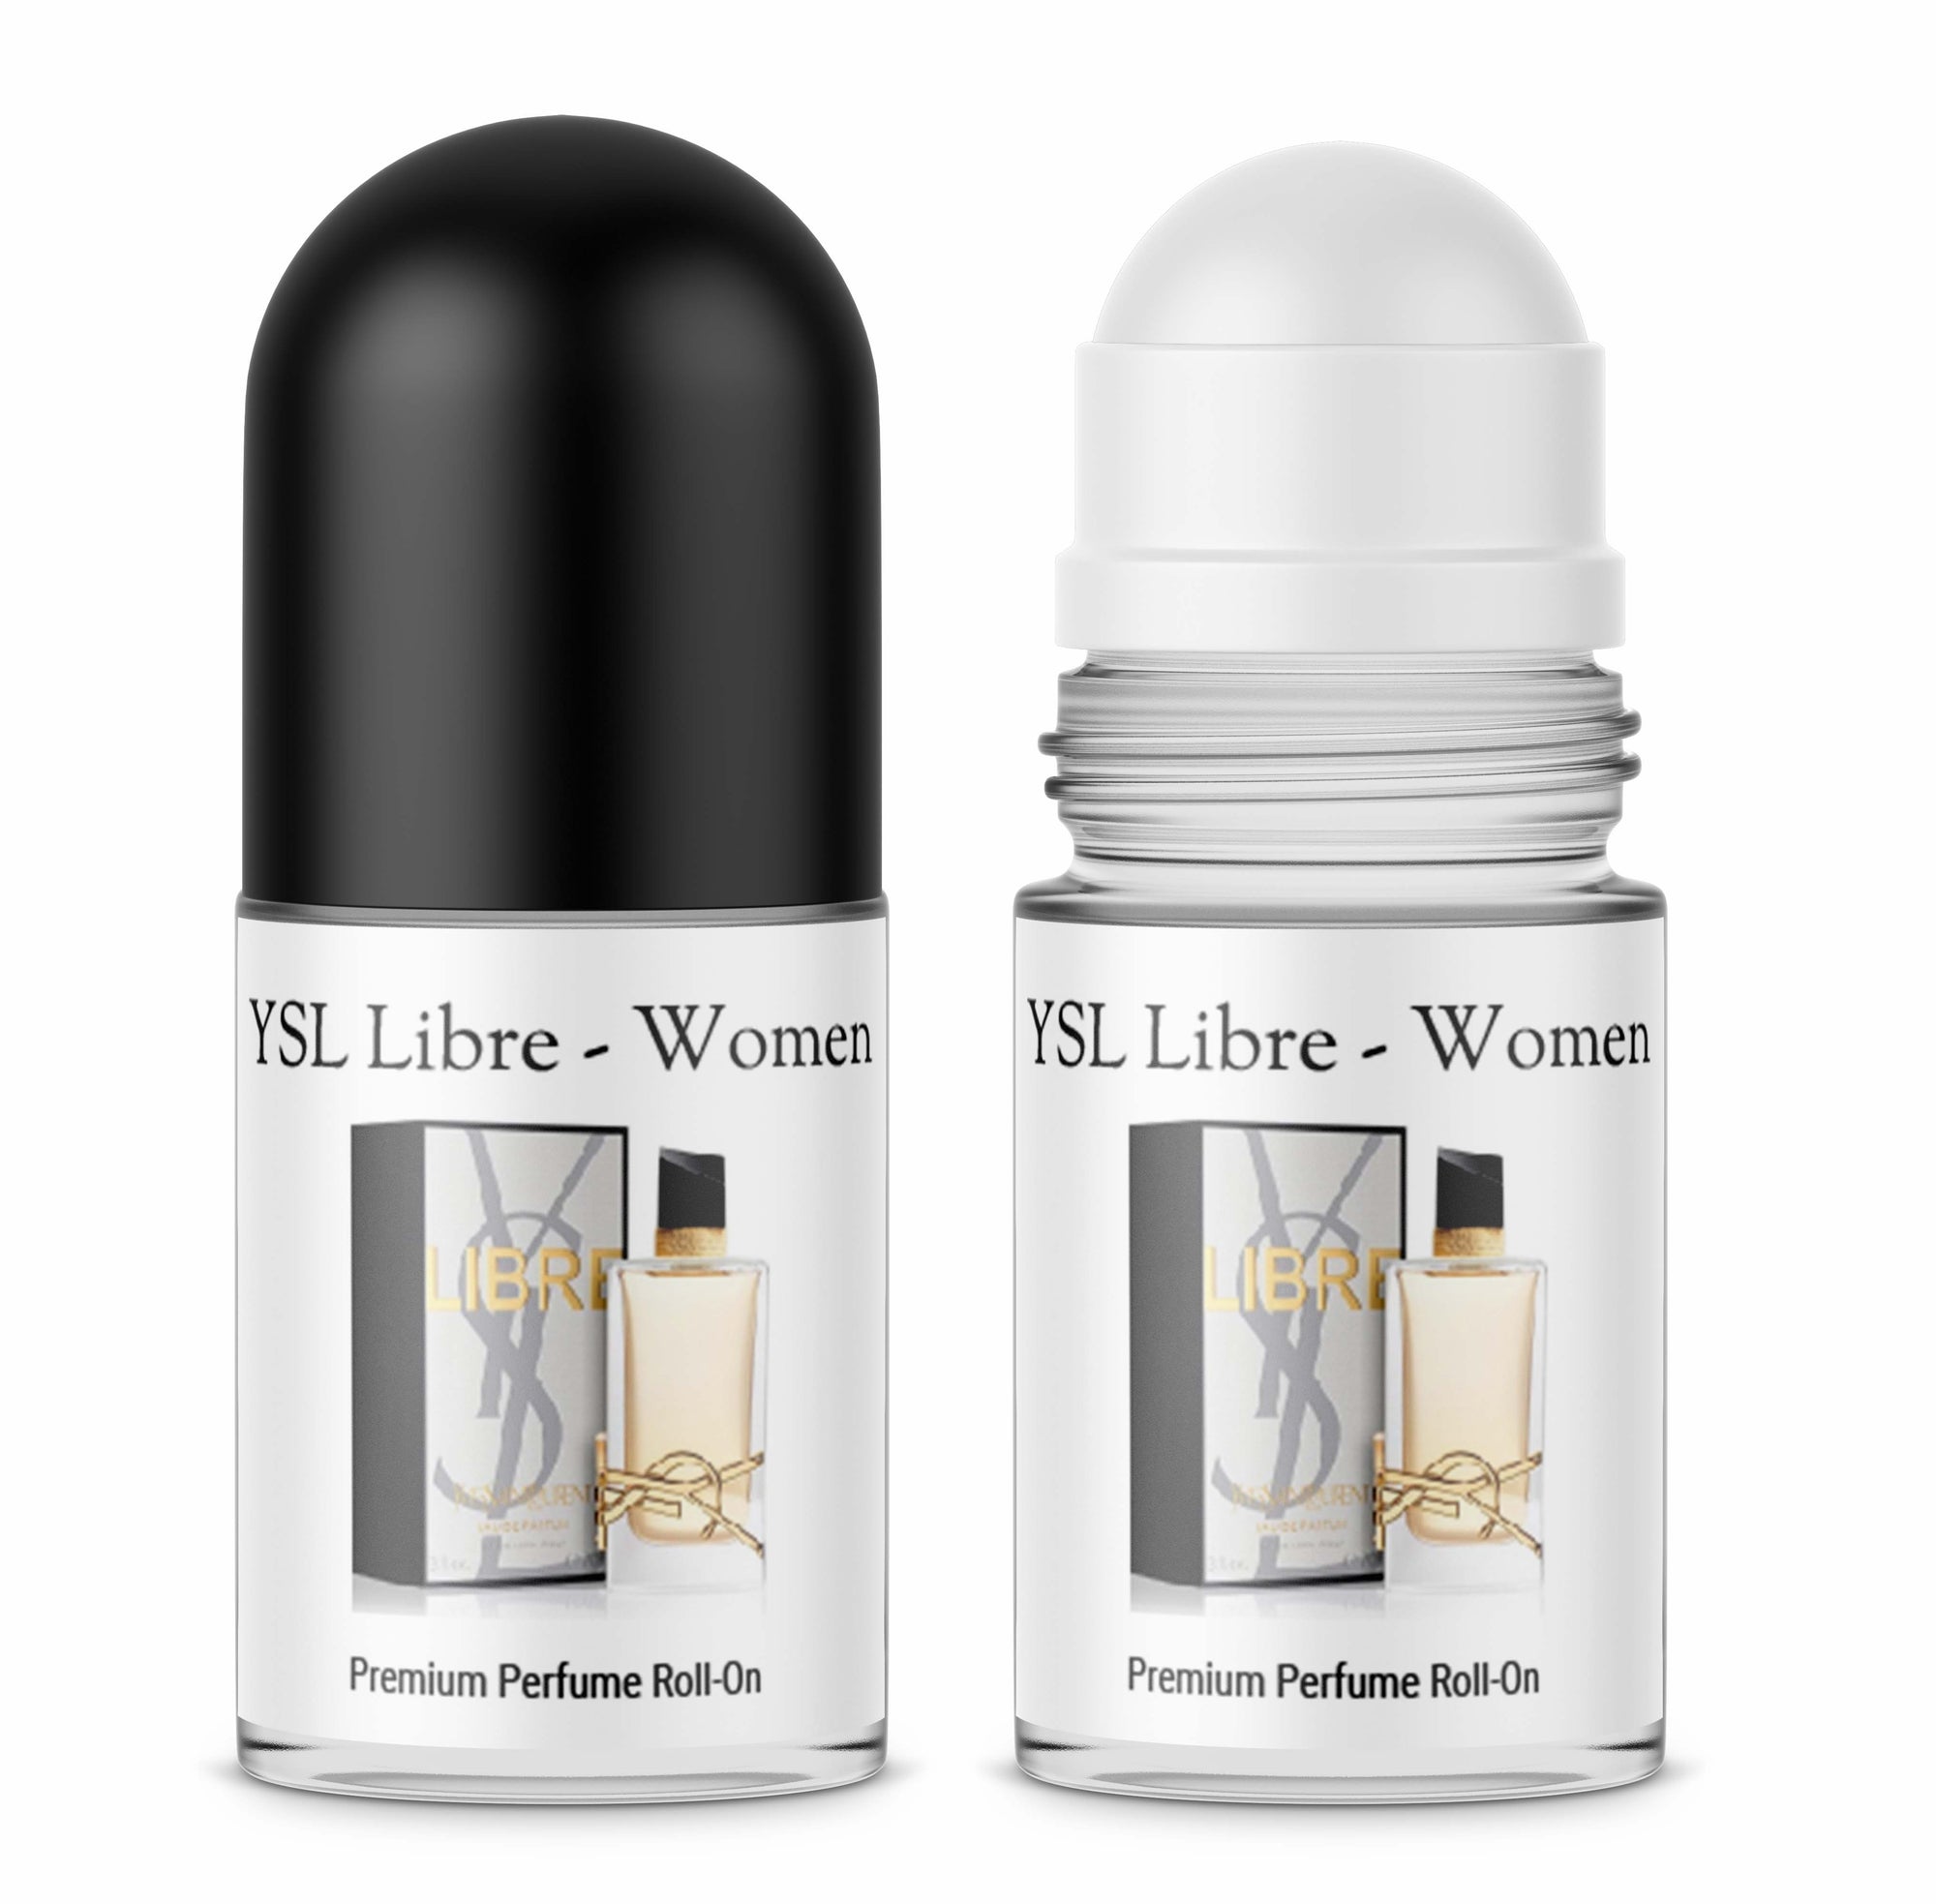 YSL Libre Women Roll On Perfume Oil - Natural Sister's / Nature's